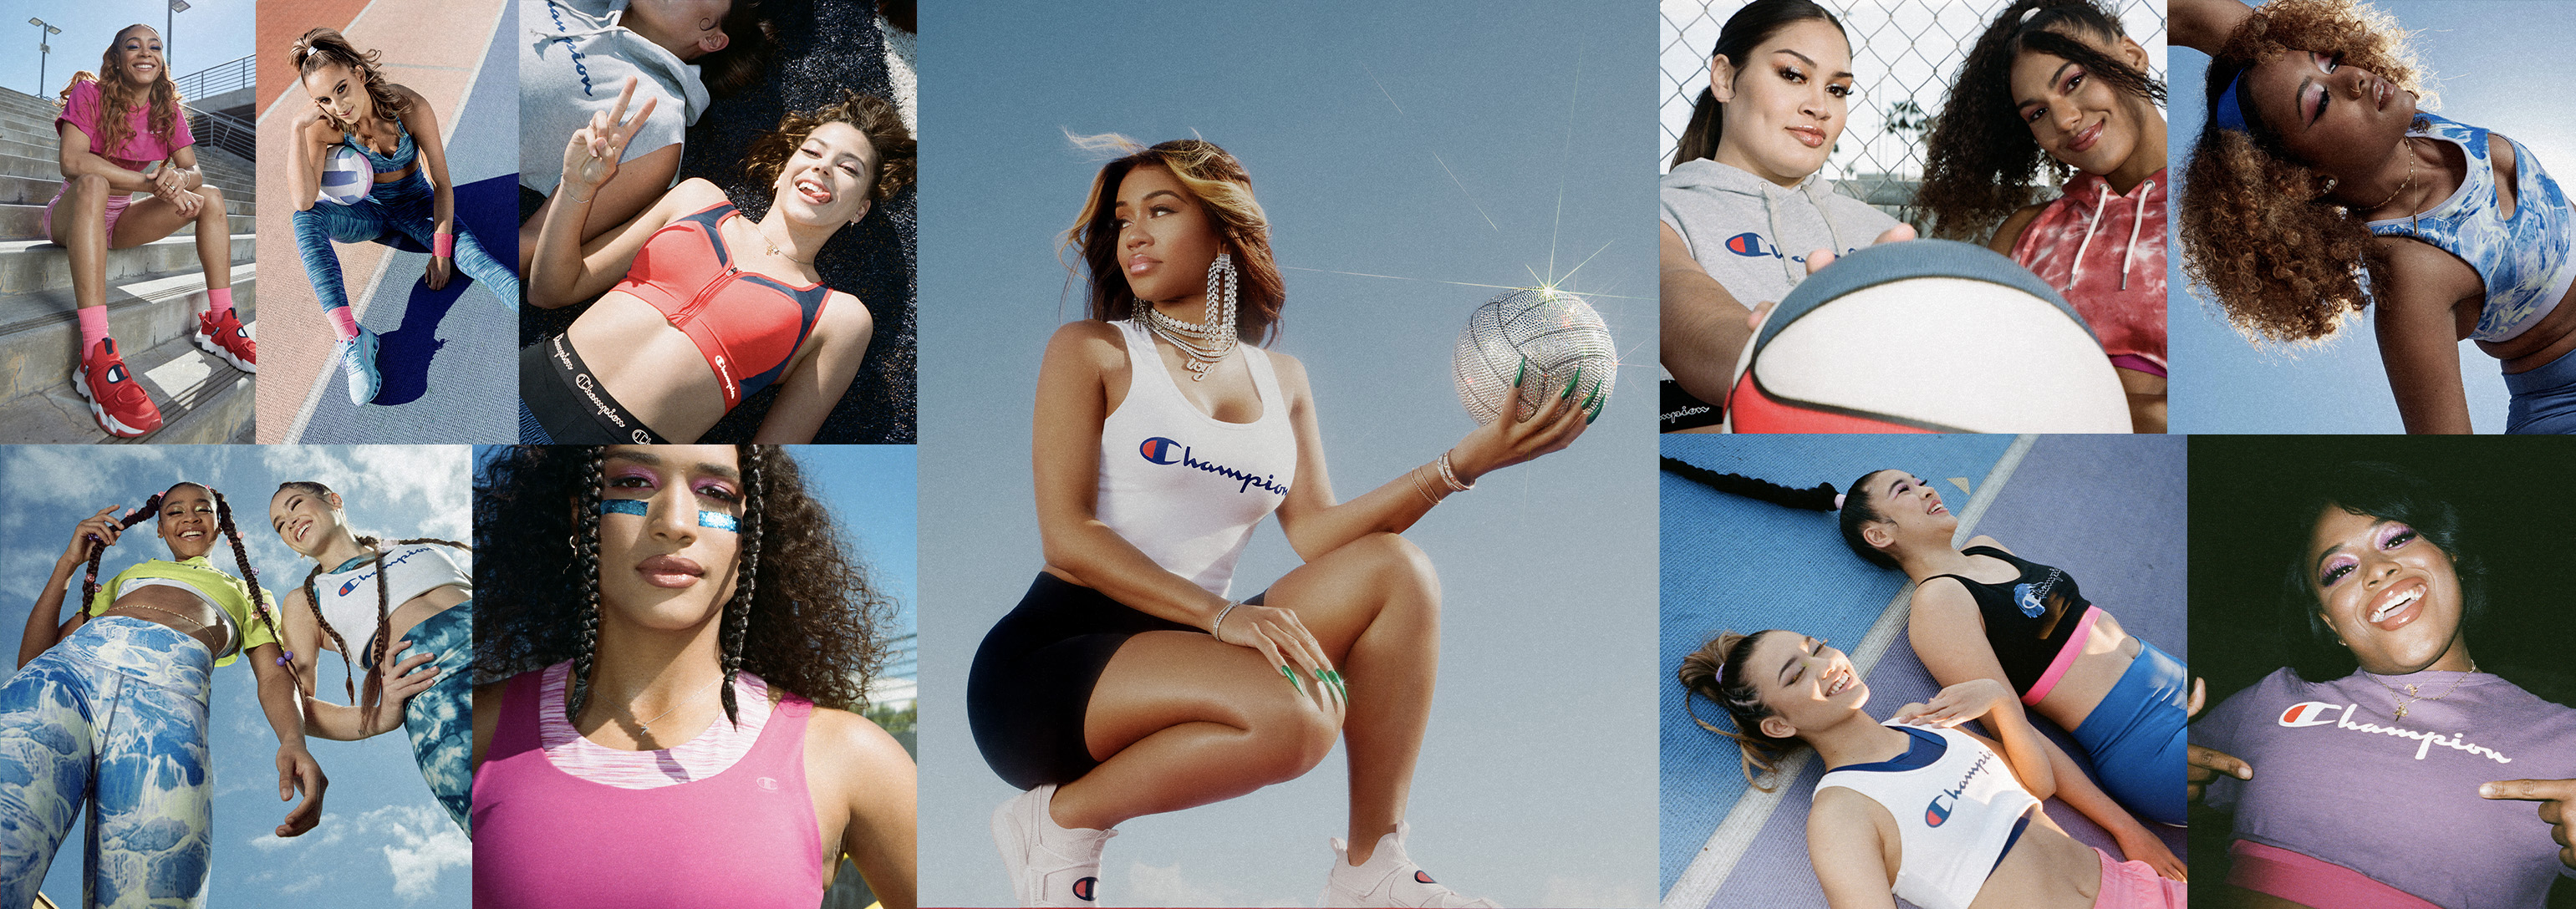 Champion® Gives Women the Confidence to Play By Their Own Rules New “Get it Sportswear Campaign | Business